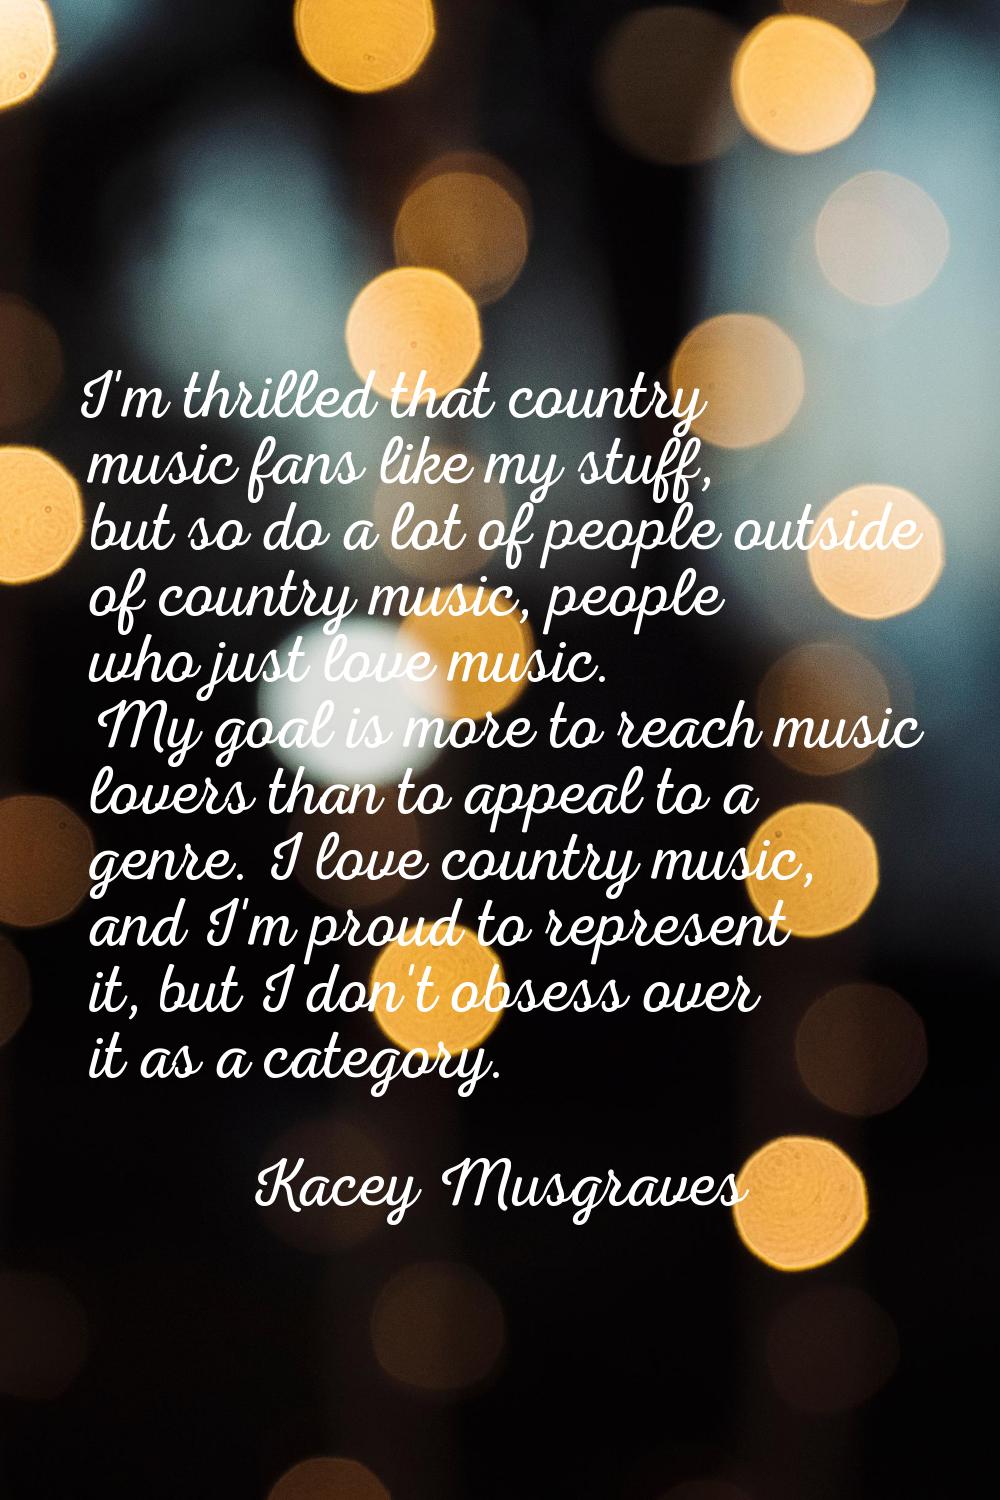 I'm thrilled that country music fans like my stuff, but so do a lot of people outside of country mu